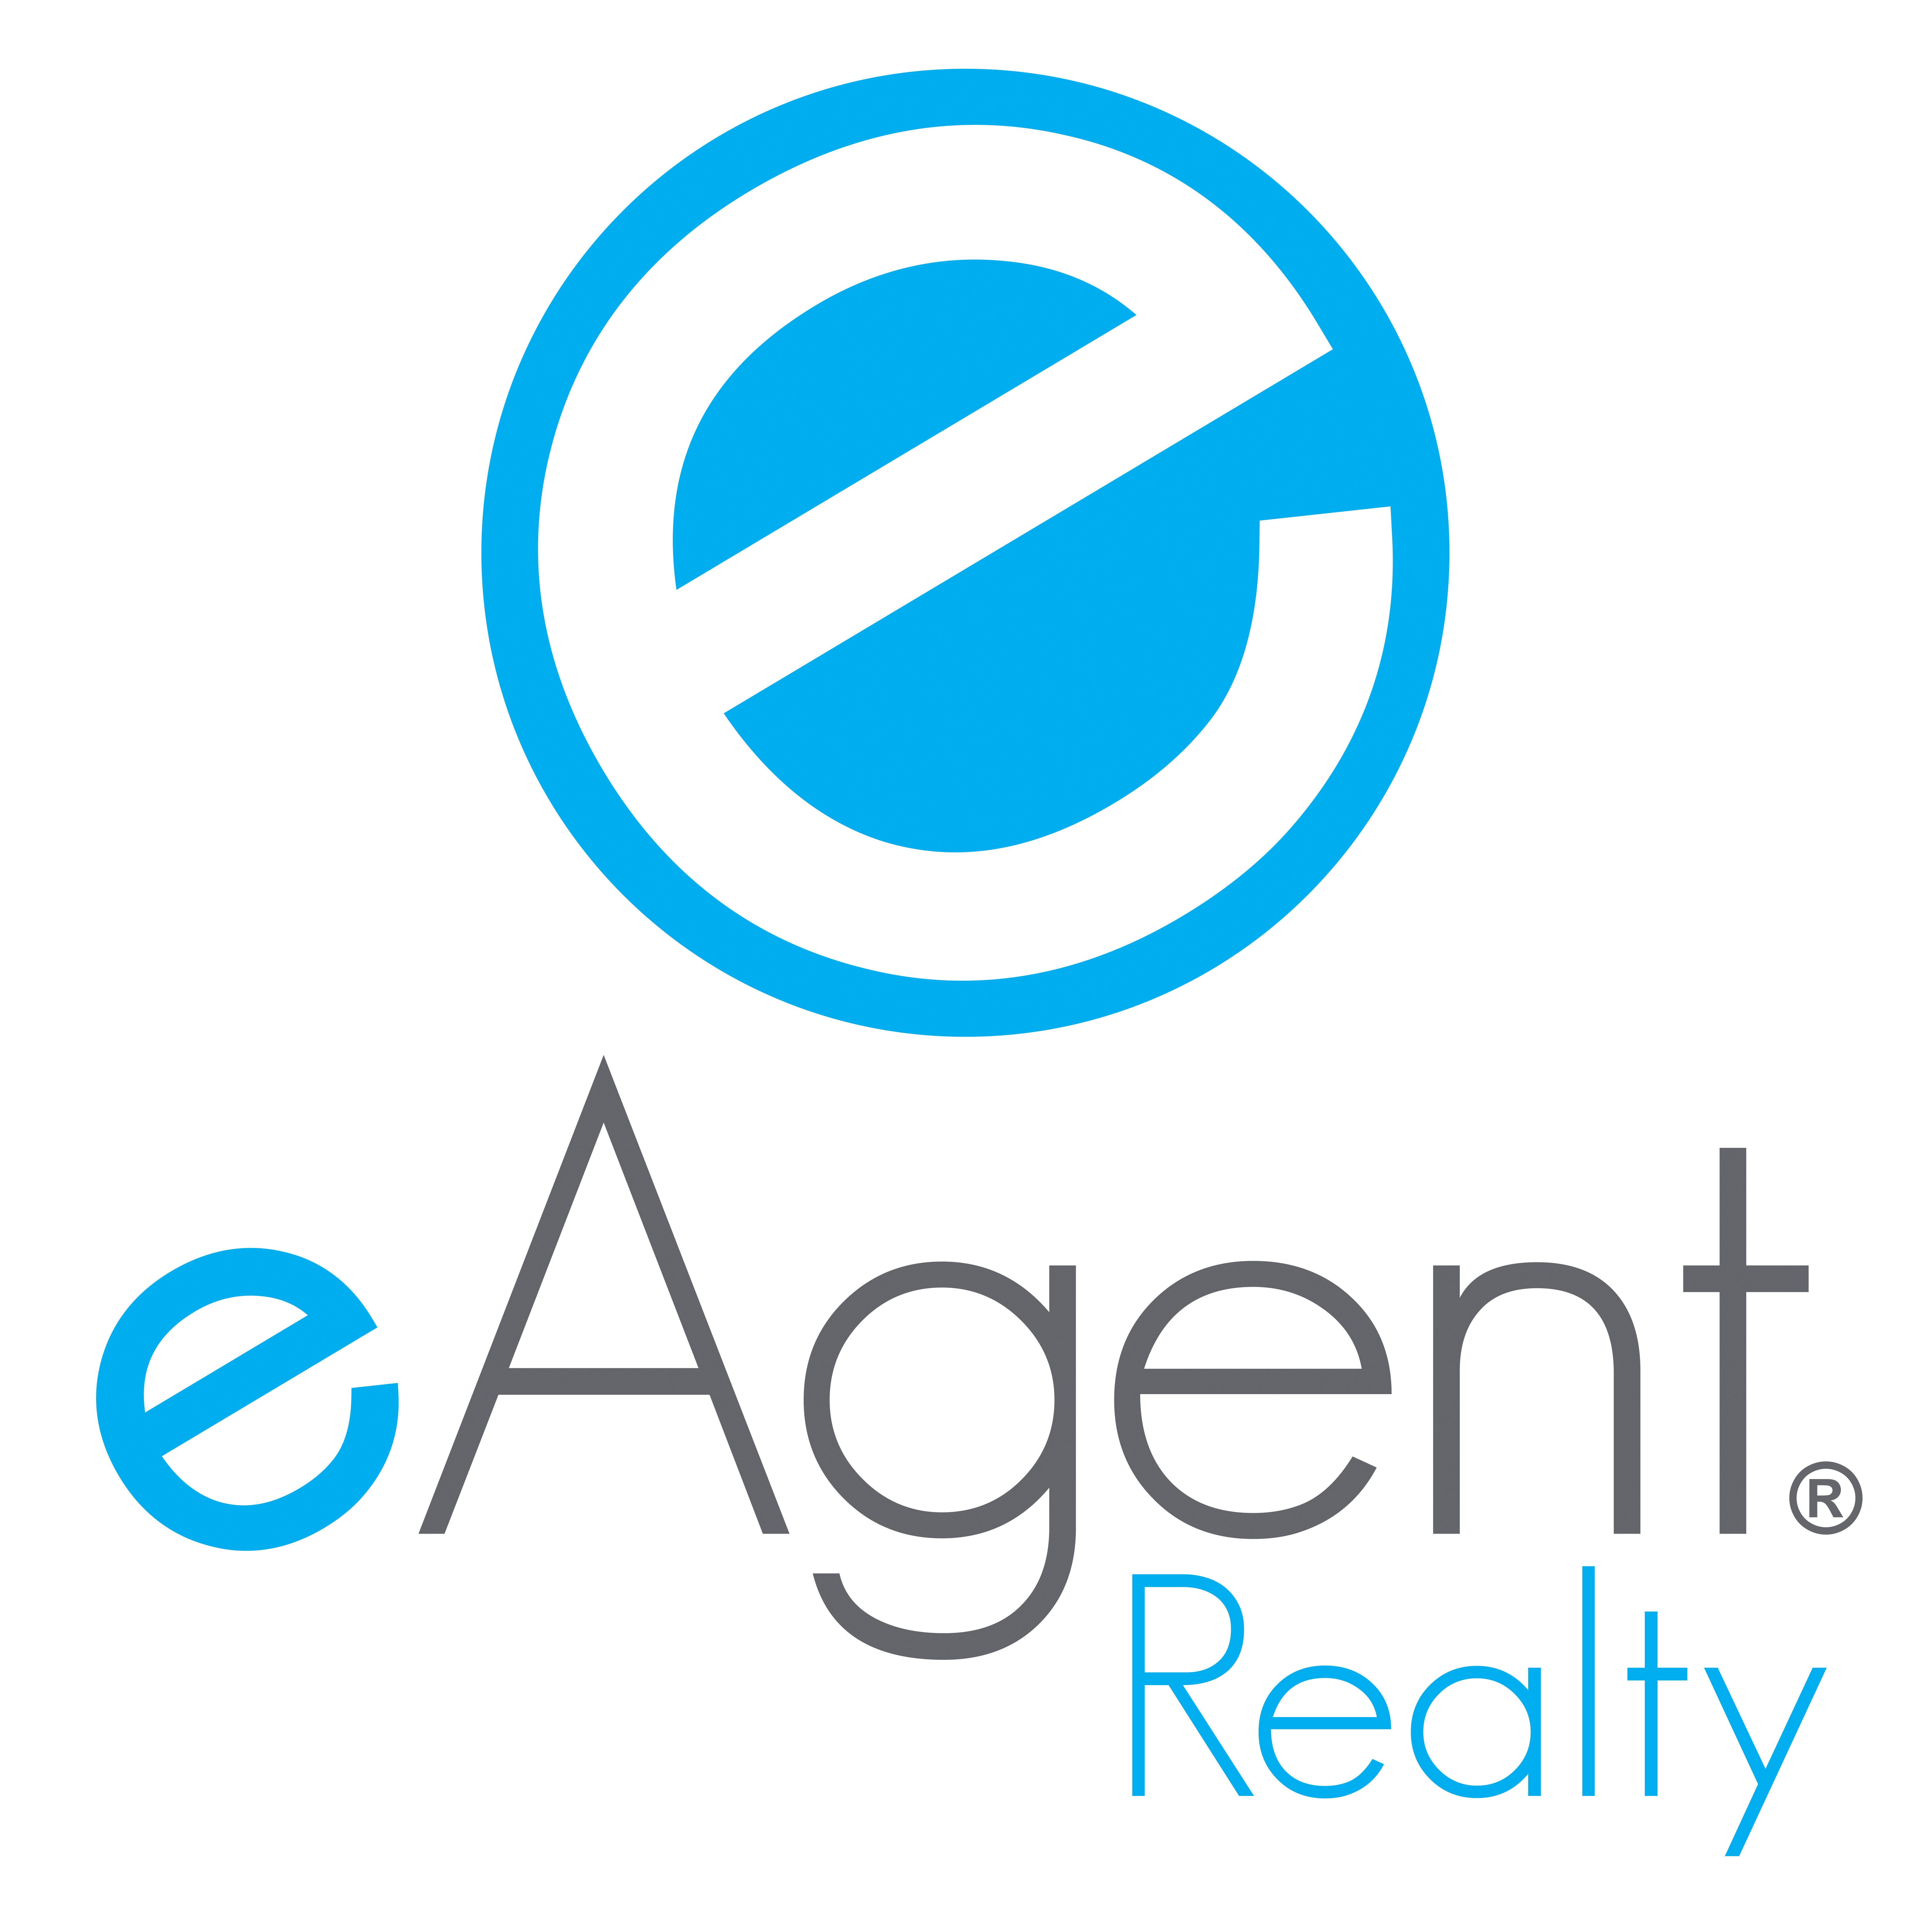 eAgent Realty,Gulfport,eAgent